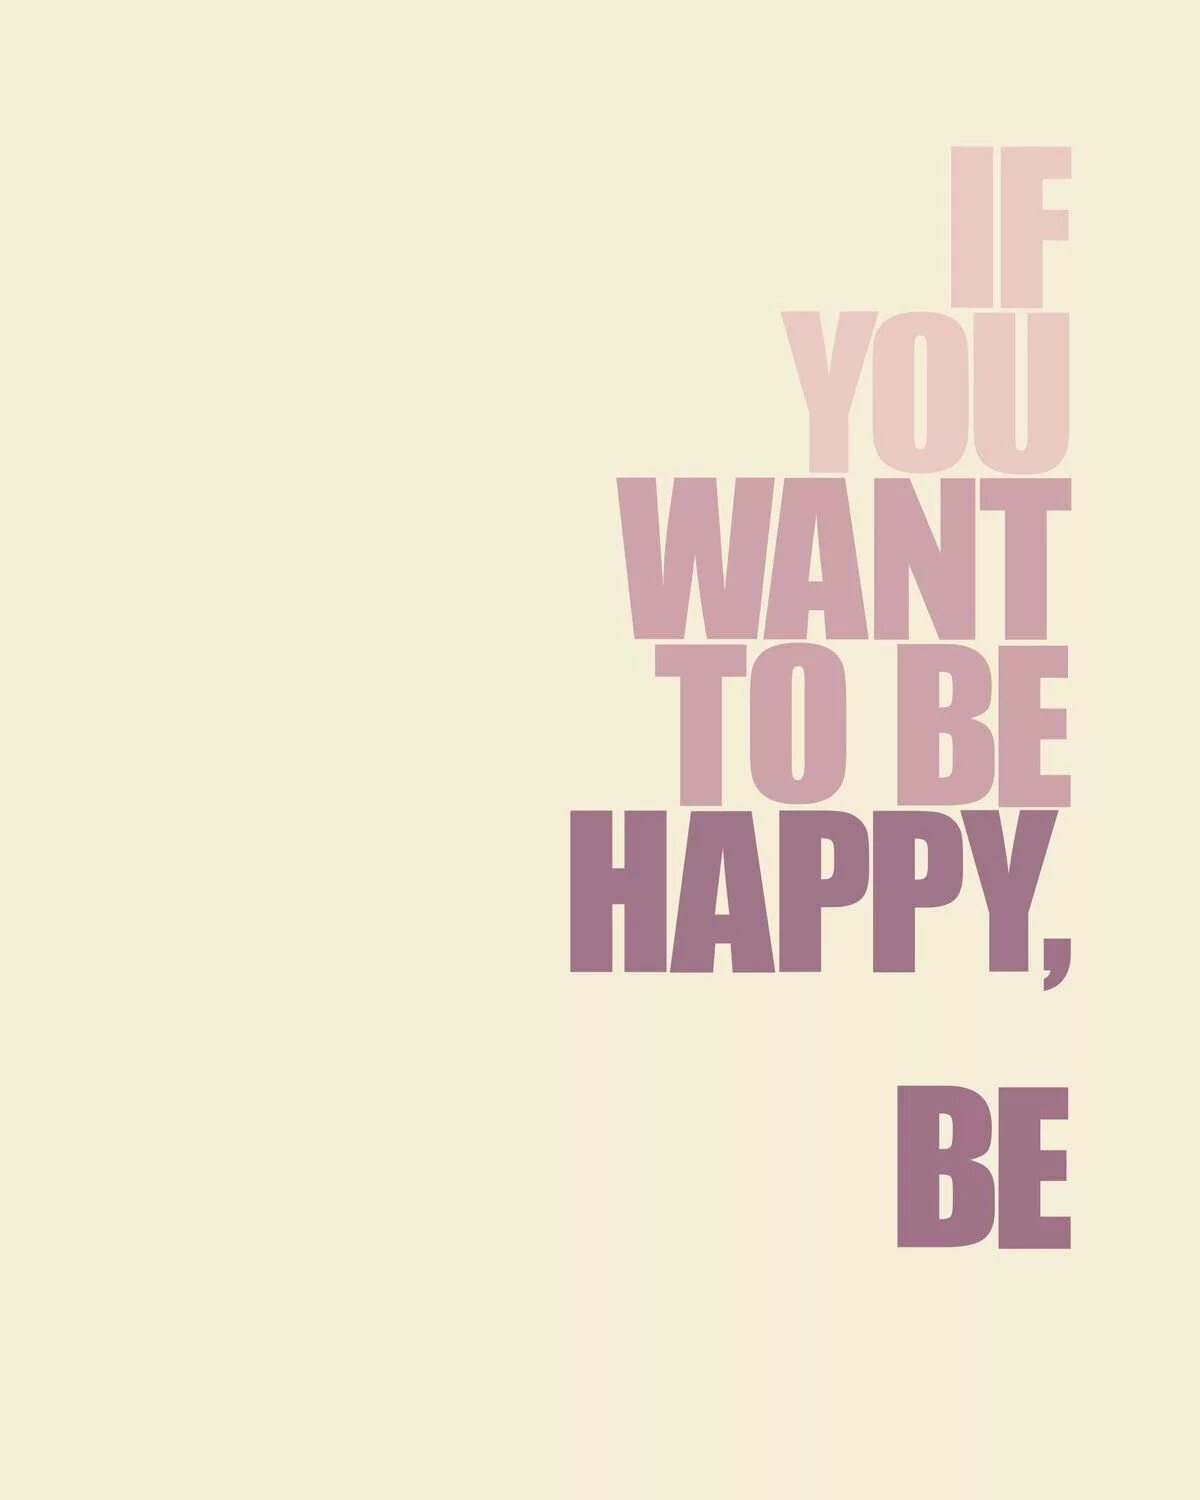 Be happy com. If you want to be Happy be. Be Happy. Цитаты be Happy be. I want to be Happy картинки.